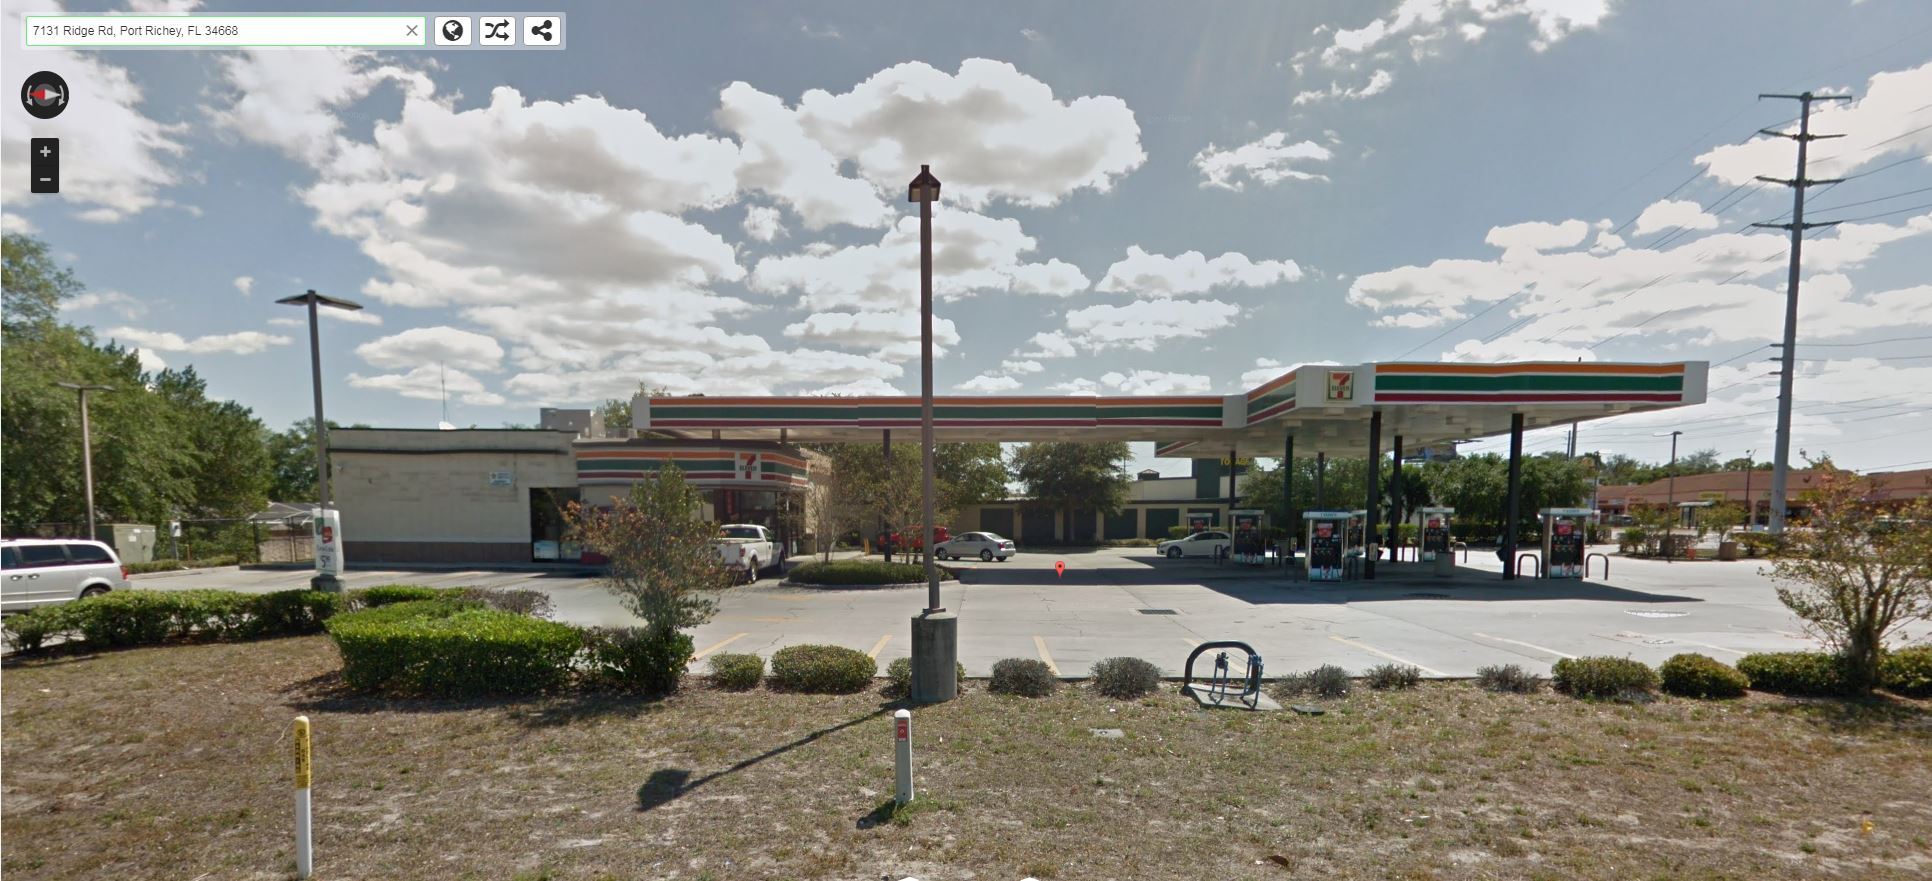 PHOTO: The 7-Eleven, located at 7131 Ridge Road in Port Richey, Florida. 